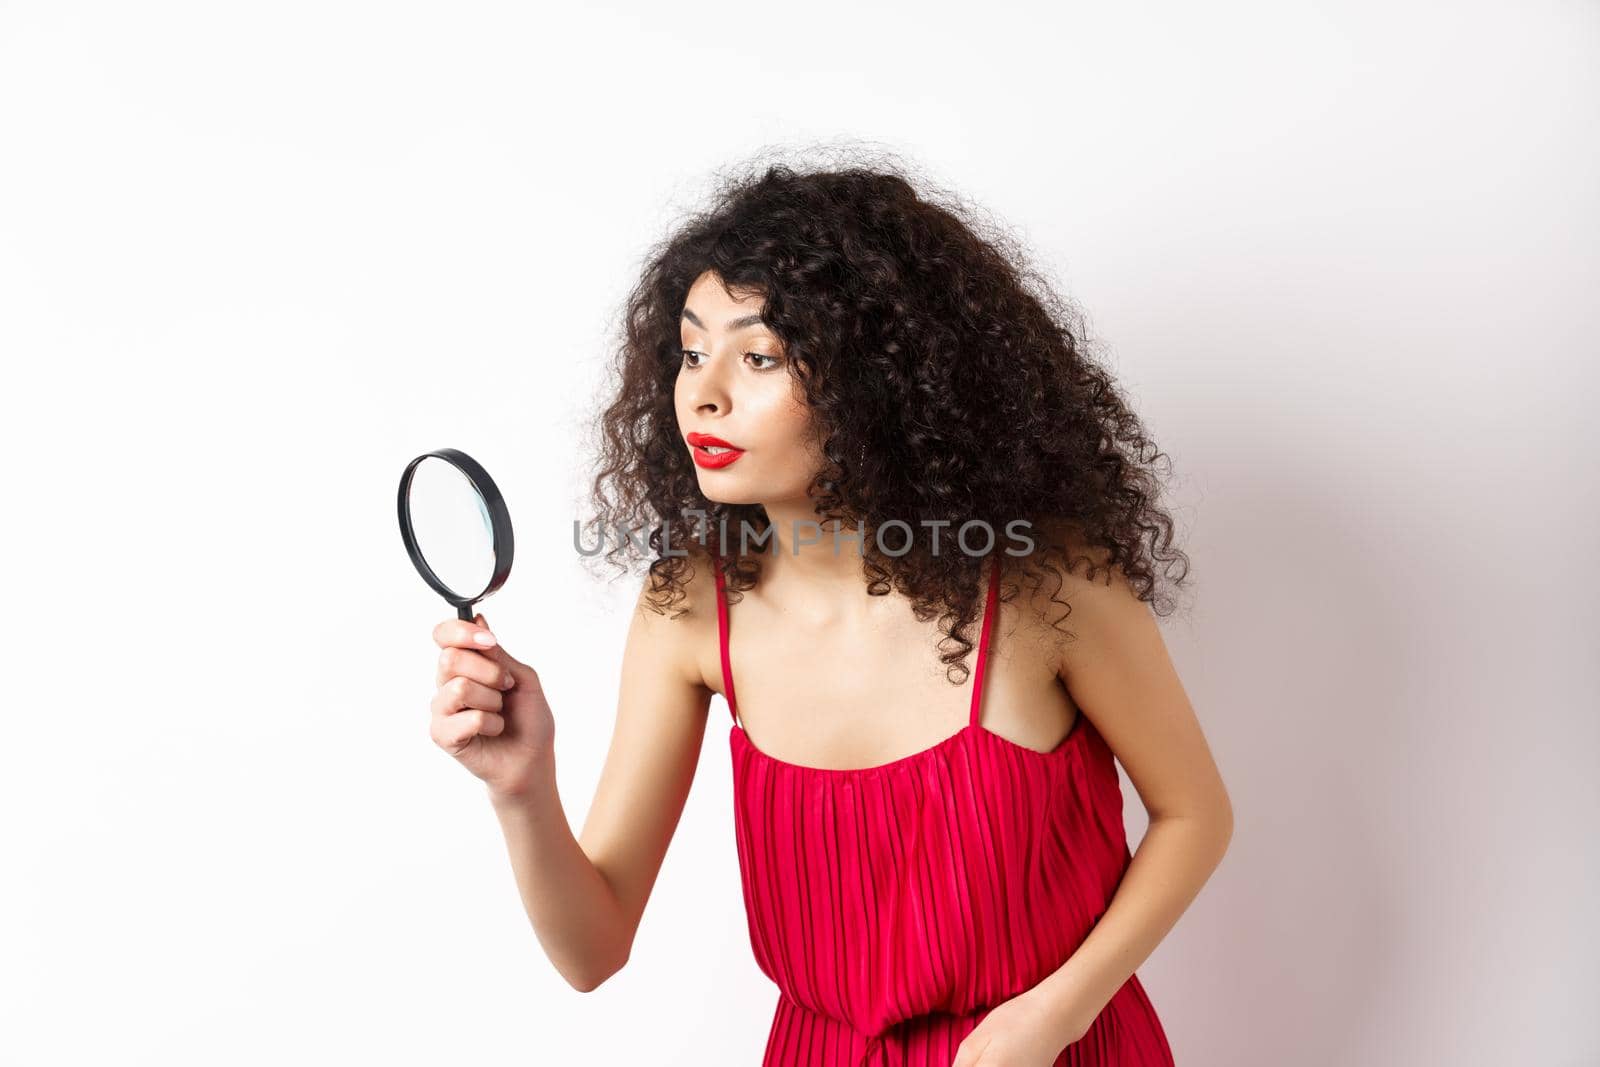 Beautiful woman in red dress searching for something, looking aside through magnifying glass, standing against white background.